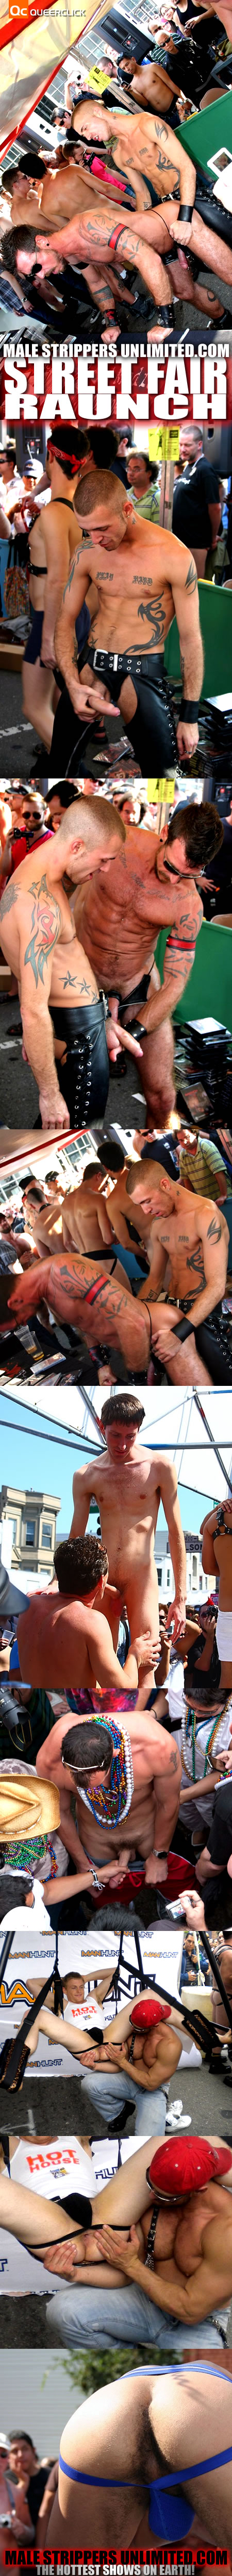 Male Strippers Unlimited: Street Fair Raunch